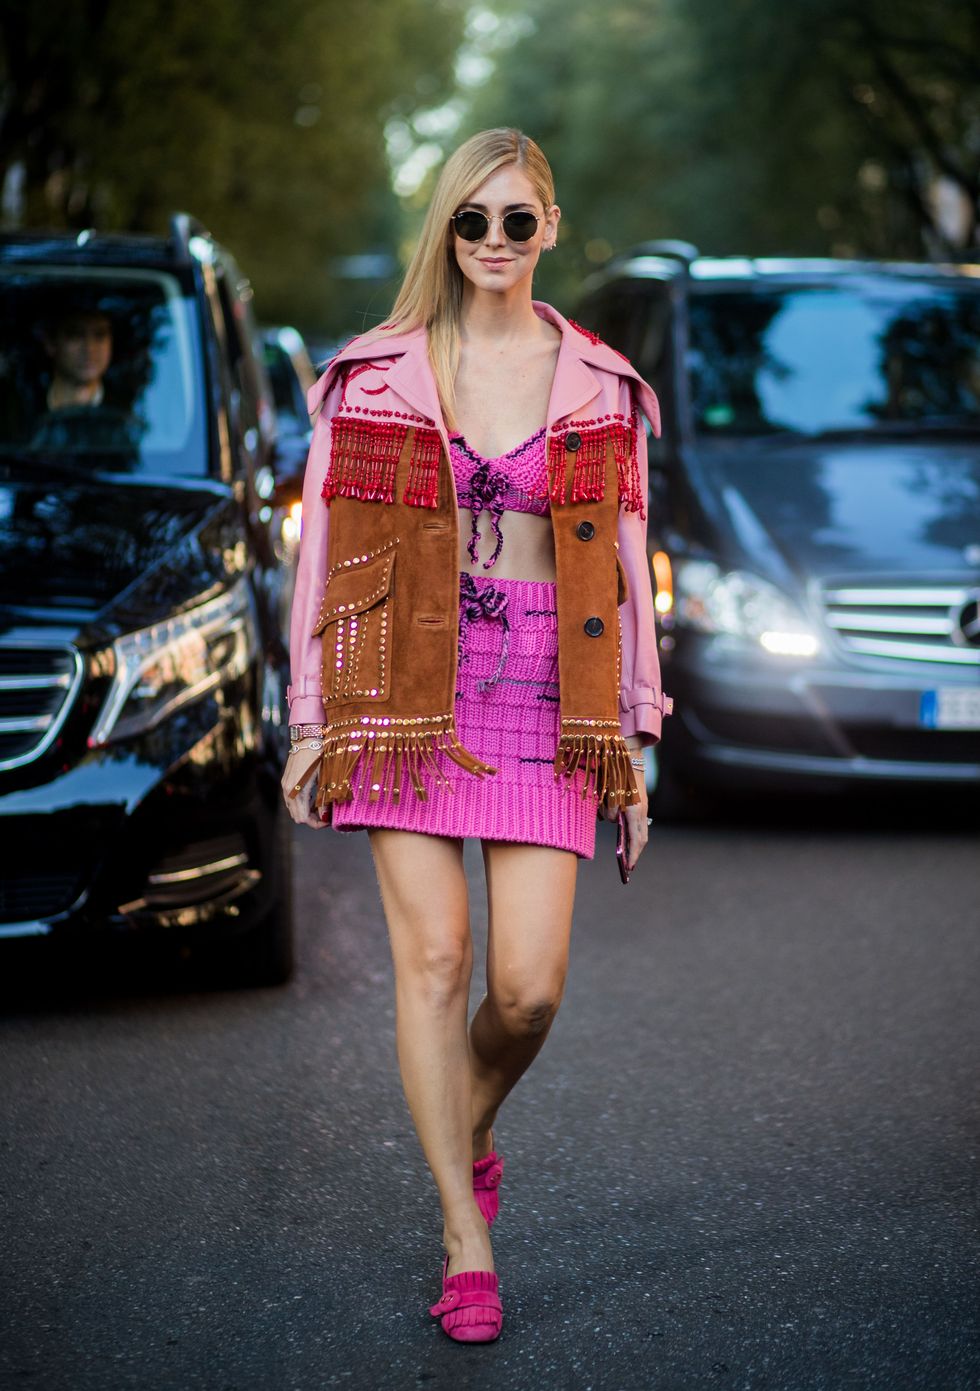 MILAN, ITALY - SEPTEMBER 21: Chiara Ferragni wearing pink skirt and top, jacket with fringes is seen outside Prada during Milan Fashion Week Spring/Summer 2018 on September 21, 2017 in Milan, Italy. (Photo by Christian Vierig/Getty Images)